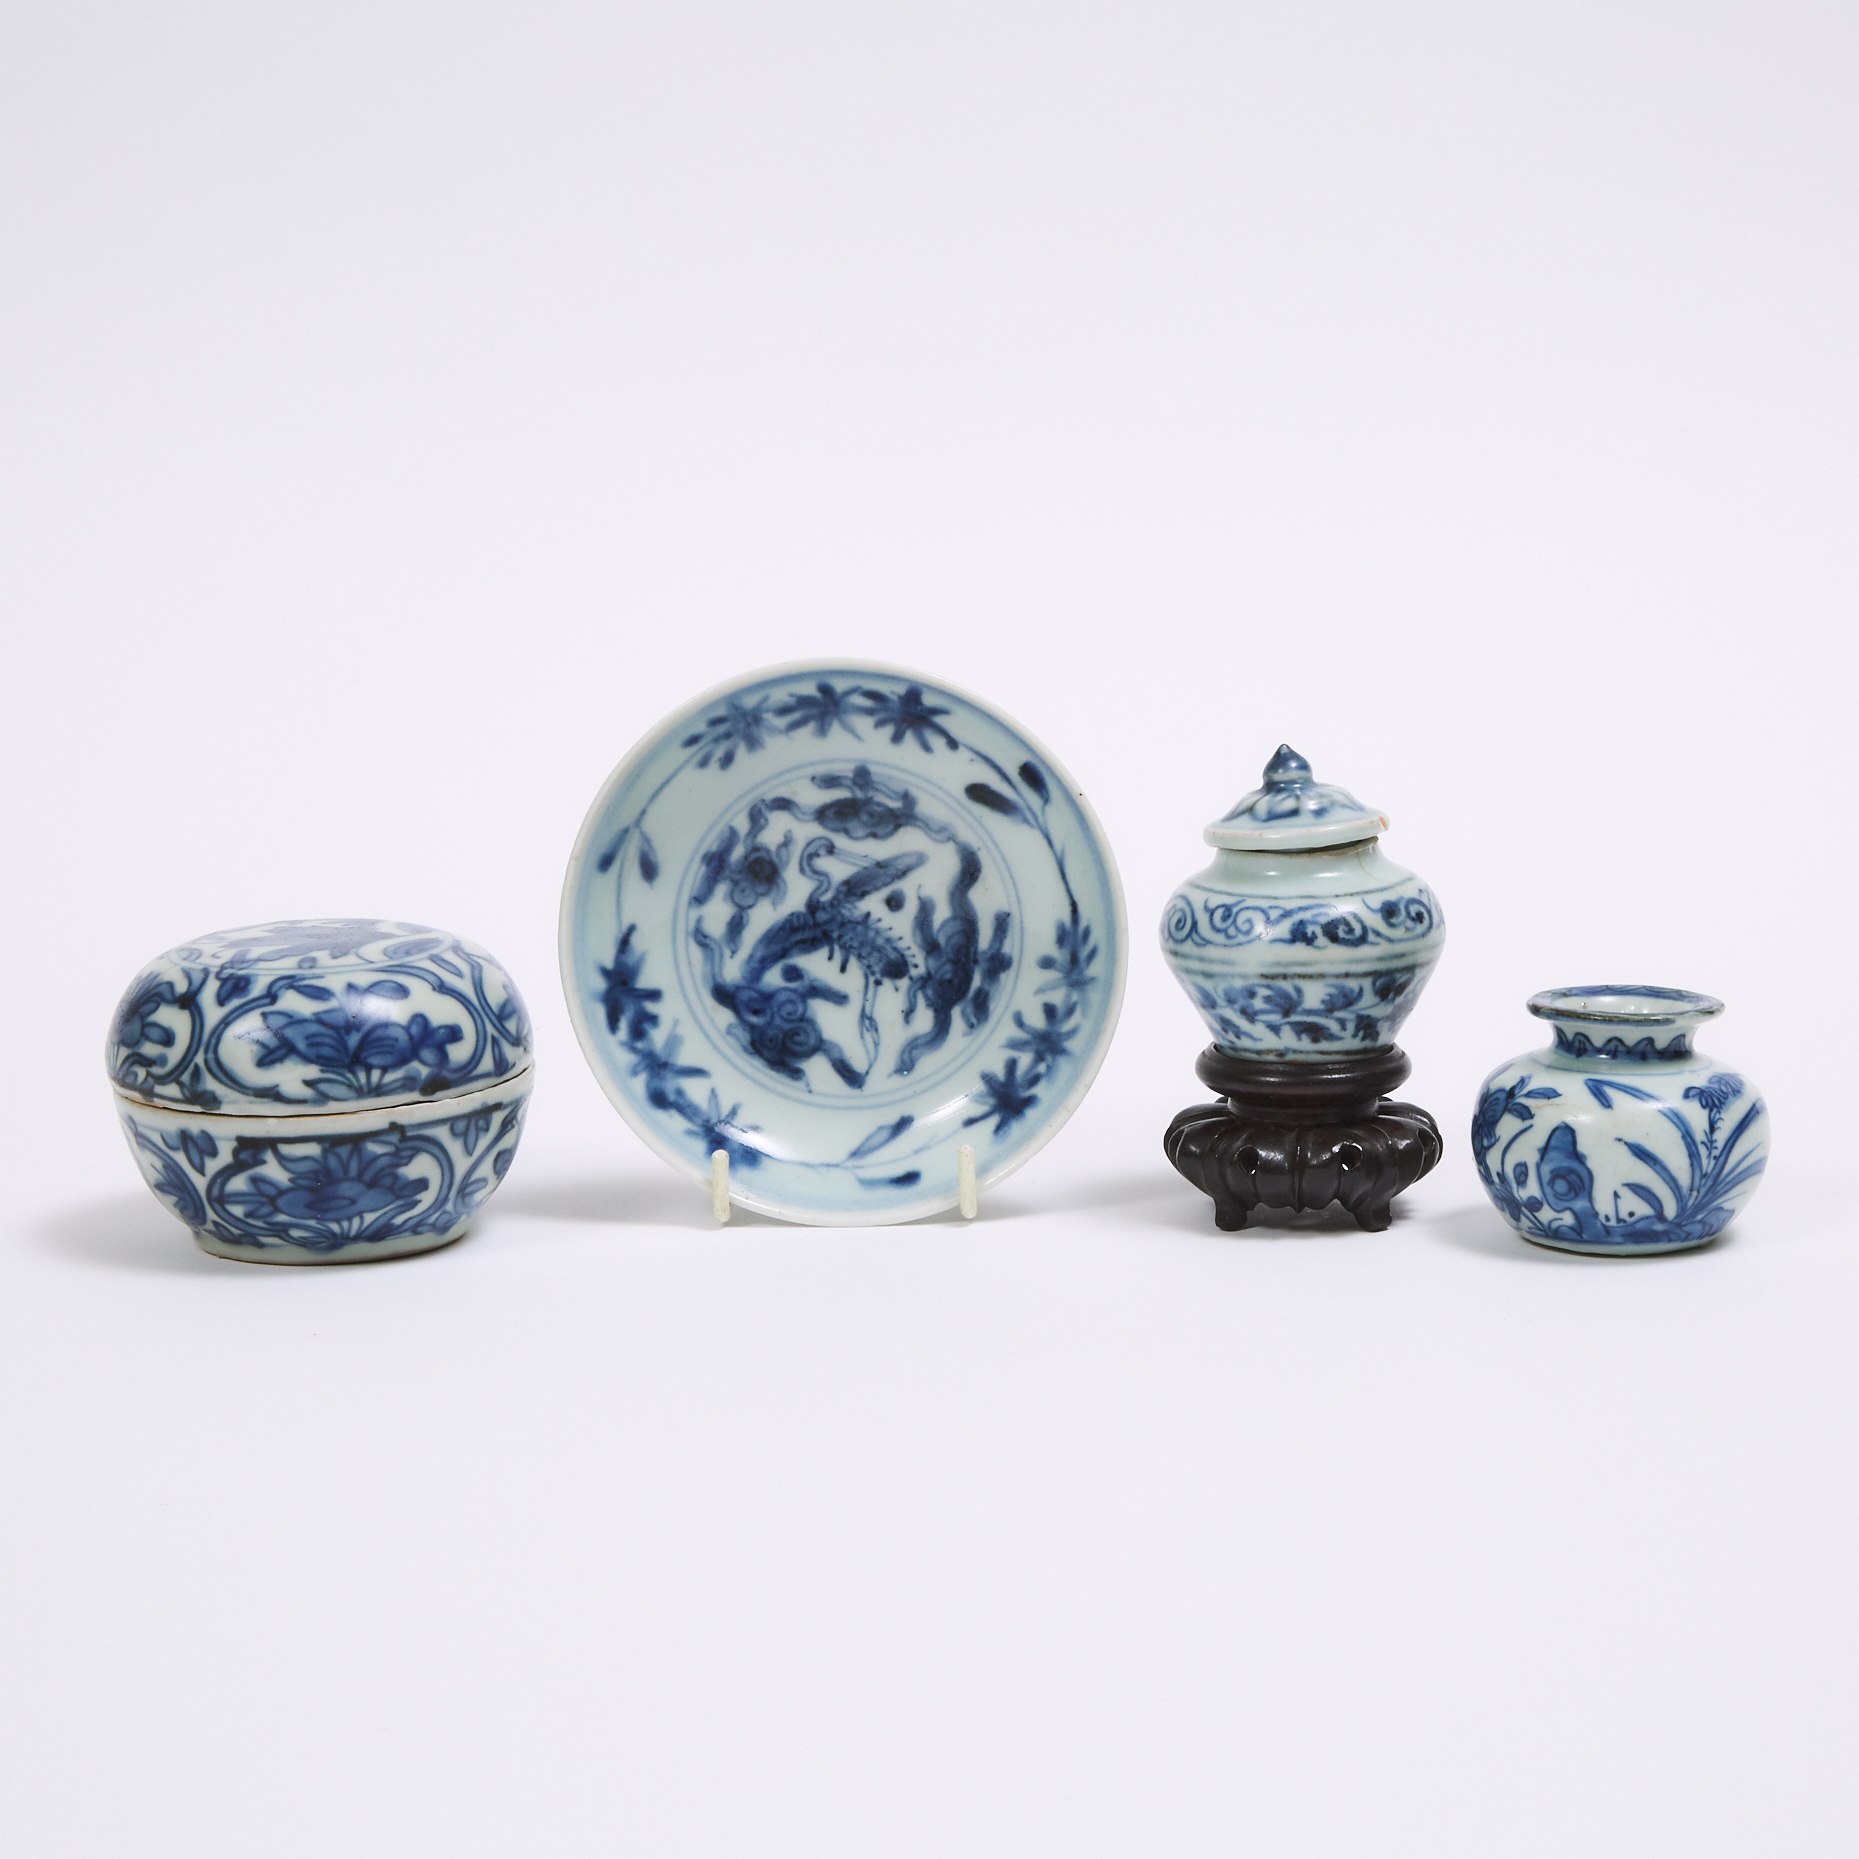 A Group of Four Blue and White Porcelain Wares, Ming Dynasty